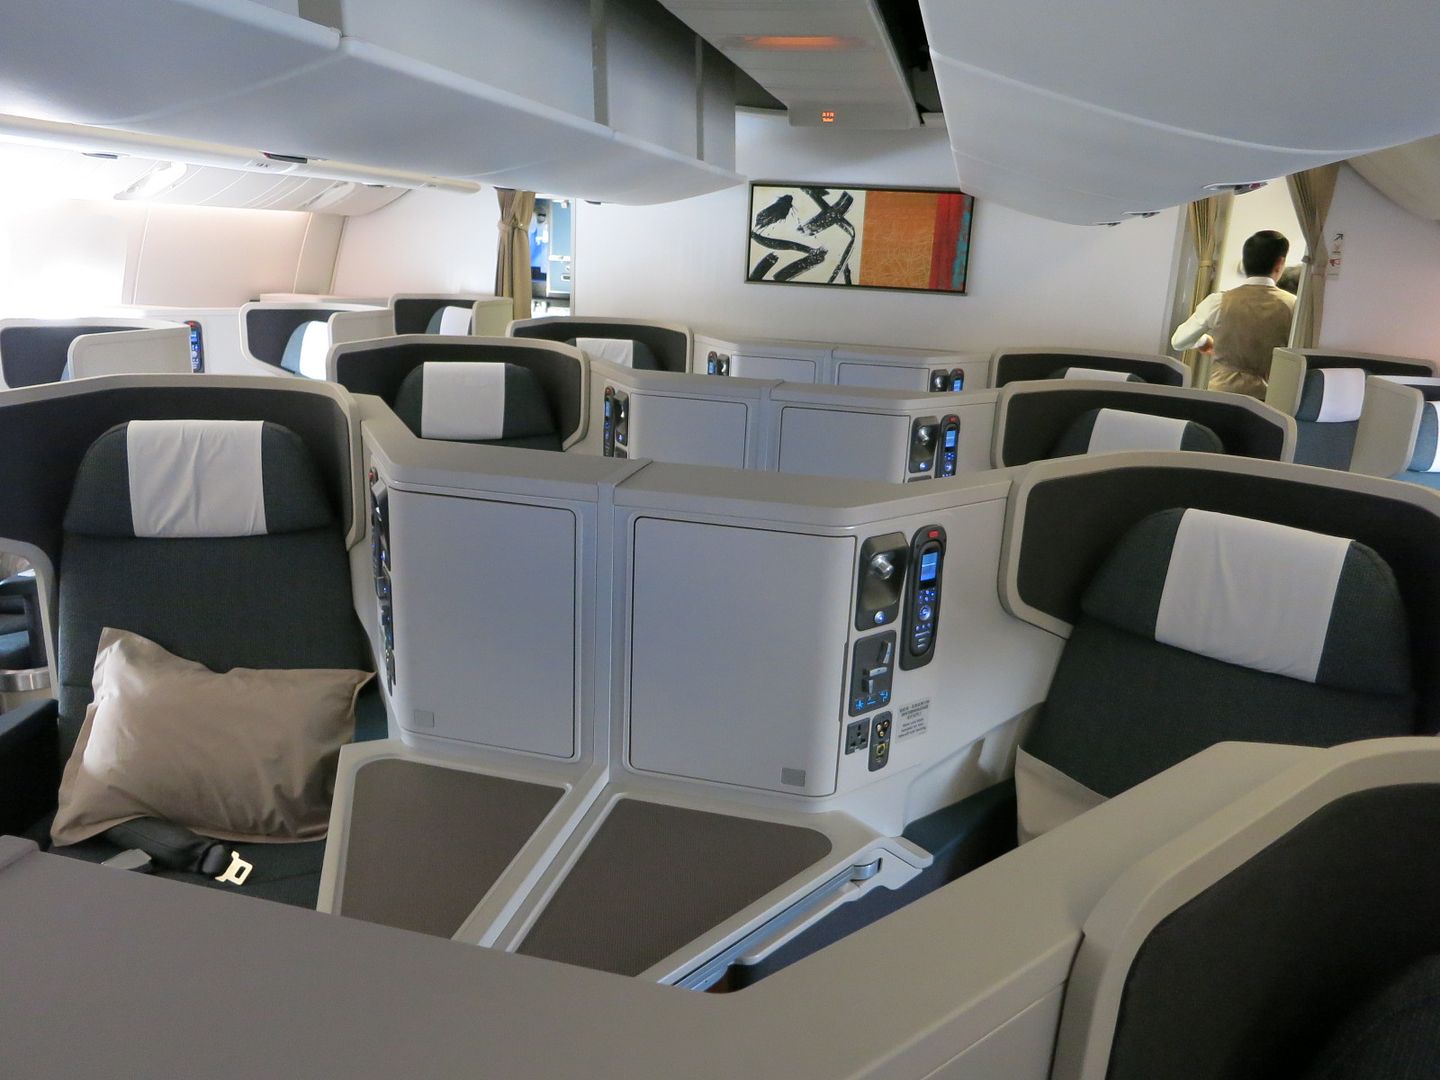 These are the World's Best Business Class Products